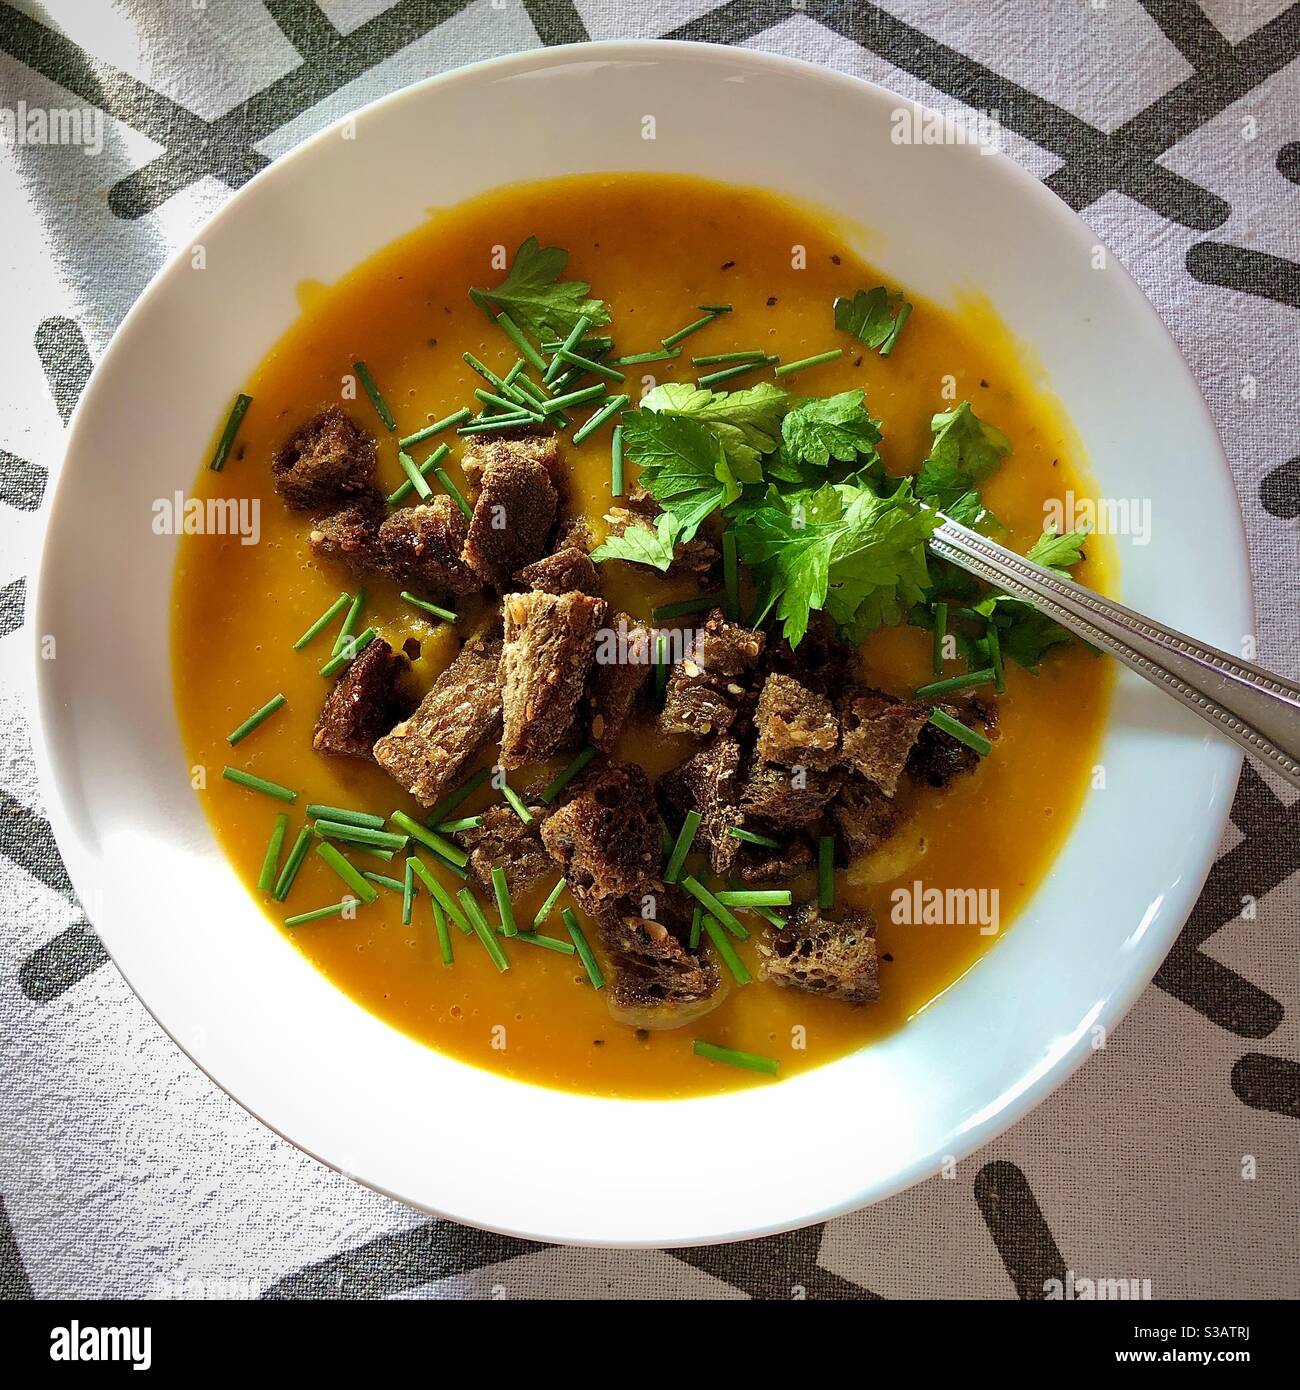 Pumpkin and potato soup with croutons, chives and parsley. Stock Photo